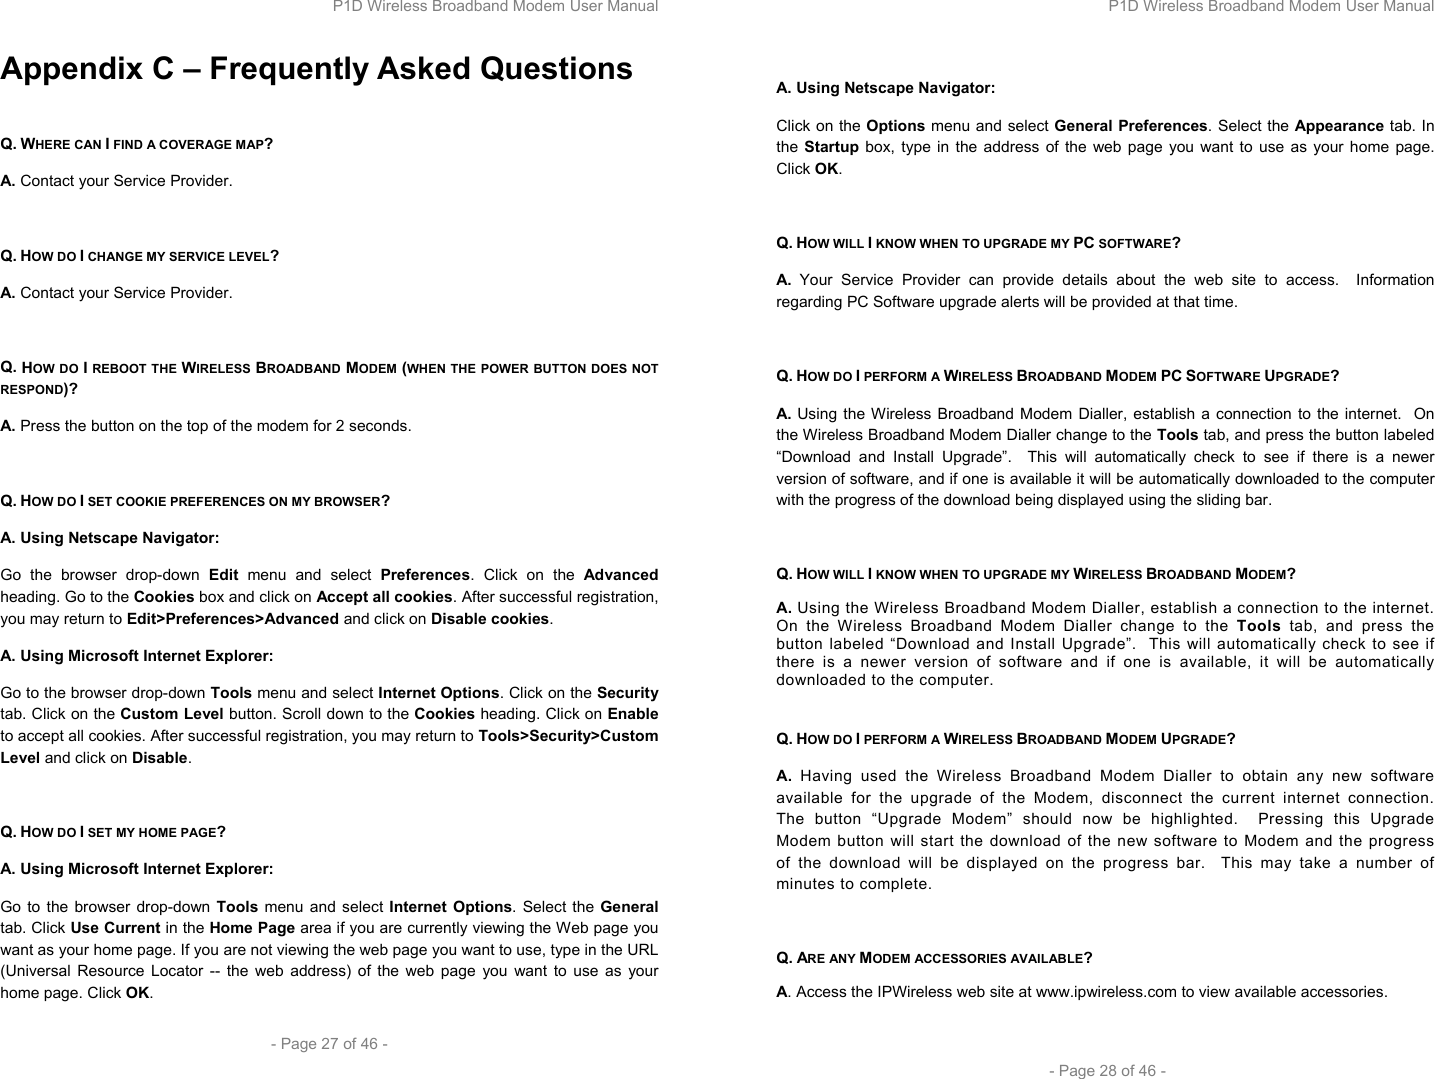 P1D Wireless Broadband Modem User Manual  - Page 27 of 46 -  Appendix C – Frequently Asked Questions  Q. WHERE CAN I FIND A COVERAGE MAP? A. Contact your Service Provider.  Q. HOW DO I CHANGE MY SERVICE LEVEL? A. Contact your Service Provider.  Q. HOW DO I REBOOT THE WIRELESS BROADBAND MODEM (WHEN THE POWER BUTTON DOES NOT RESPOND)? A. Press the button on the top of the modem for 2 seconds.  Q. HOW DO I SET COOKIE PREFERENCES ON MY BROWSER? A. Using Netscape Navigator: Go the browser drop-down Edit menu and select Preferences. Click on the Advanced heading. Go to the Cookies box and click on Accept all cookies. After successful registration, you may return to Edit&gt;Preferences&gt;Advanced and click on Disable cookies. A. Using Microsoft Internet Explorer: Go to the browser drop-down Tools menu and select Internet Options. Click on the Security tab. Click on the Custom Level button. Scroll down to the Cookies heading. Click on Enable to accept all cookies. After successful registration, you may return to Tools&gt;Security&gt;Custom Level and click on Disable.  Q. HOW DO I SET MY HOME PAGE? A. Using Microsoft Internet Explorer: Go to the browser drop-down Tools menu and select Internet Options. Select the General tab. Click Use Current in the Home Page area if you are currently viewing the Web page you want as your home page. If you are not viewing the web page you want to use, type in the URL (Universal Resource Locator -- the web address) of the web page you want to use as your home page. Click OK. P1D Wireless Broadband Modem User Manual  - Page 28 of 46 -  A. Using Netscape Navigator: Click on the Options menu and select General Preferences. Select the Appearance tab. In the Startup box, type in the address of the web page you want to use as your home page. Click OK.  Q. HOW WILL I KNOW WHEN TO UPGRADE MY PC SOFTWARE? A. Your Service Provider can provide details about the web site to access.  Information regarding PC Software upgrade alerts will be provided at that time.  Q. HOW DO I PERFORM A WIRELESS BROADBAND MODEM PC SOFTWARE UPGRADE? A. Using the Wireless Broadband Modem Dialler, establish a connection to the internet.  On the Wireless Broadband Modem Dialler change to the Tools tab, and press the button labeled “Download and Install Upgrade”.  This will automatically check to see if there is a newer version of software, and if one is available it will be automatically downloaded to the computer with the progress of the download being displayed using the sliding bar.  Q. HOW WILL I KNOW WHEN TO UPGRADE MY WIRELESS BROADBAND MODEM? A. Using the Wireless Broadband Modem Dialler, establish a connection to the internet.  On the Wireless Broadband Modem Dialler change to the Tools tab, and press the button labeled “Download and Install Upgrade”.  This will automatically check to see if there is a newer version of software and if one is available, it will be automatically downloaded to the computer.  Q. HOW DO I PERFORM A WIRELESS BROADBAND MODEM UPGRADE? A. Having used the Wireless Broadband Modem Dialler to obtain any new software available for the upgrade of the Modem, disconnect the current internet connection.  The button “Upgrade Modem” should now be highlighted.  Pressing this Upgrade Modem button will start the download of the new software to Modem and the progress of the download will be displayed on the progress bar.  This may take a number of minutes to complete.  Q. ARE ANY MODEM ACCESSORIES AVAILABLE? A. Access the IPWireless web site at www.ipwireless.com to view available accessories.  